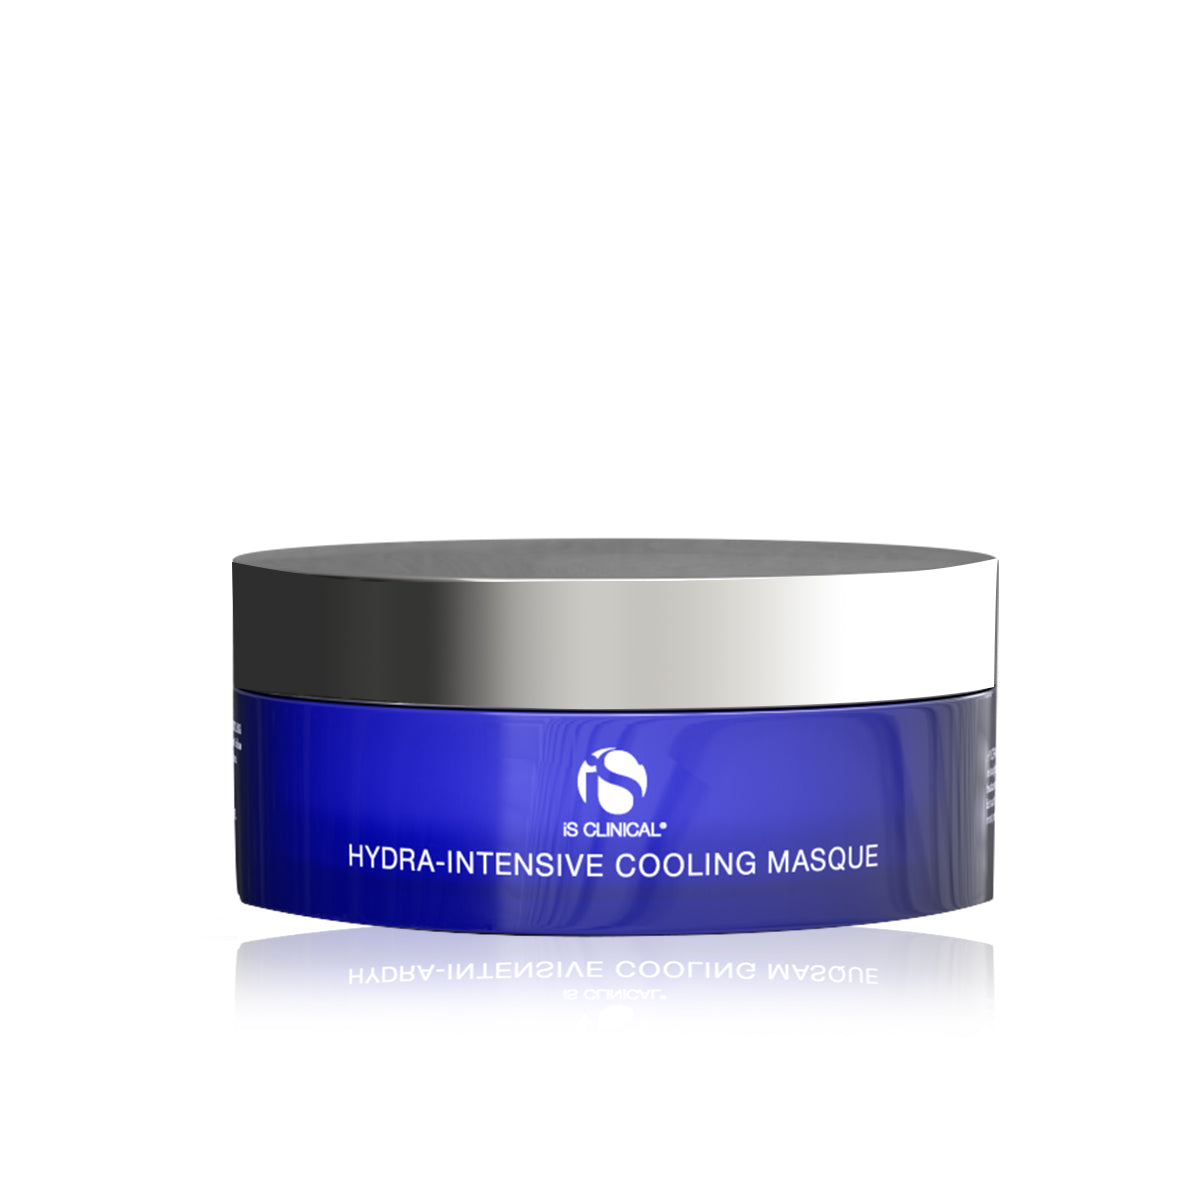 IS CLINICAL Hydra-Intensive Cooling Masque 120g